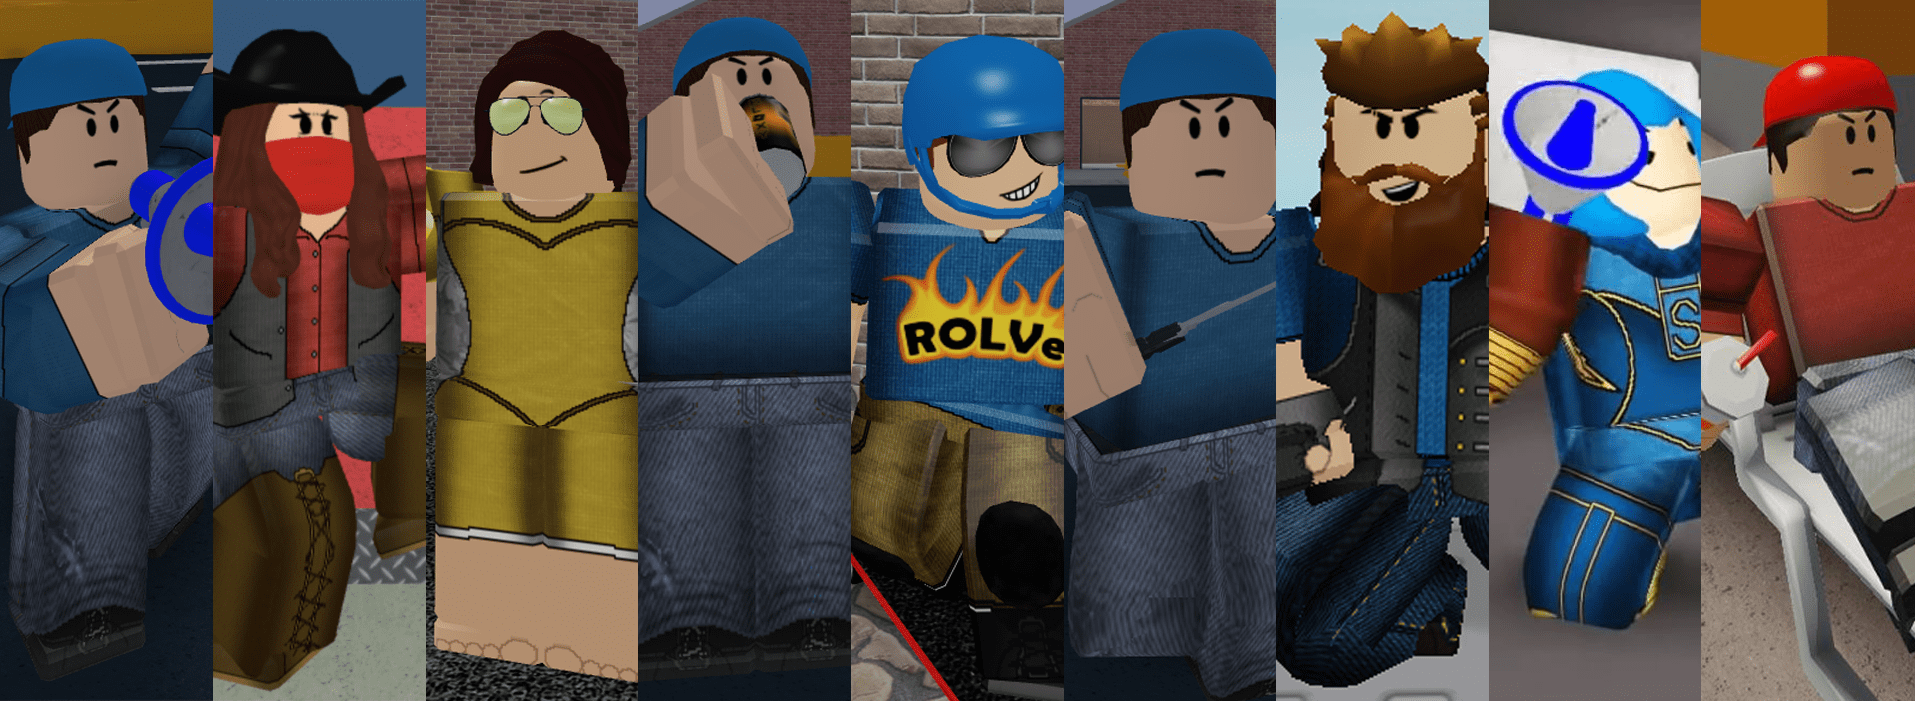 Roblox Arsenal Wallpapers Top Free Roblox Arsenal Backgrounds